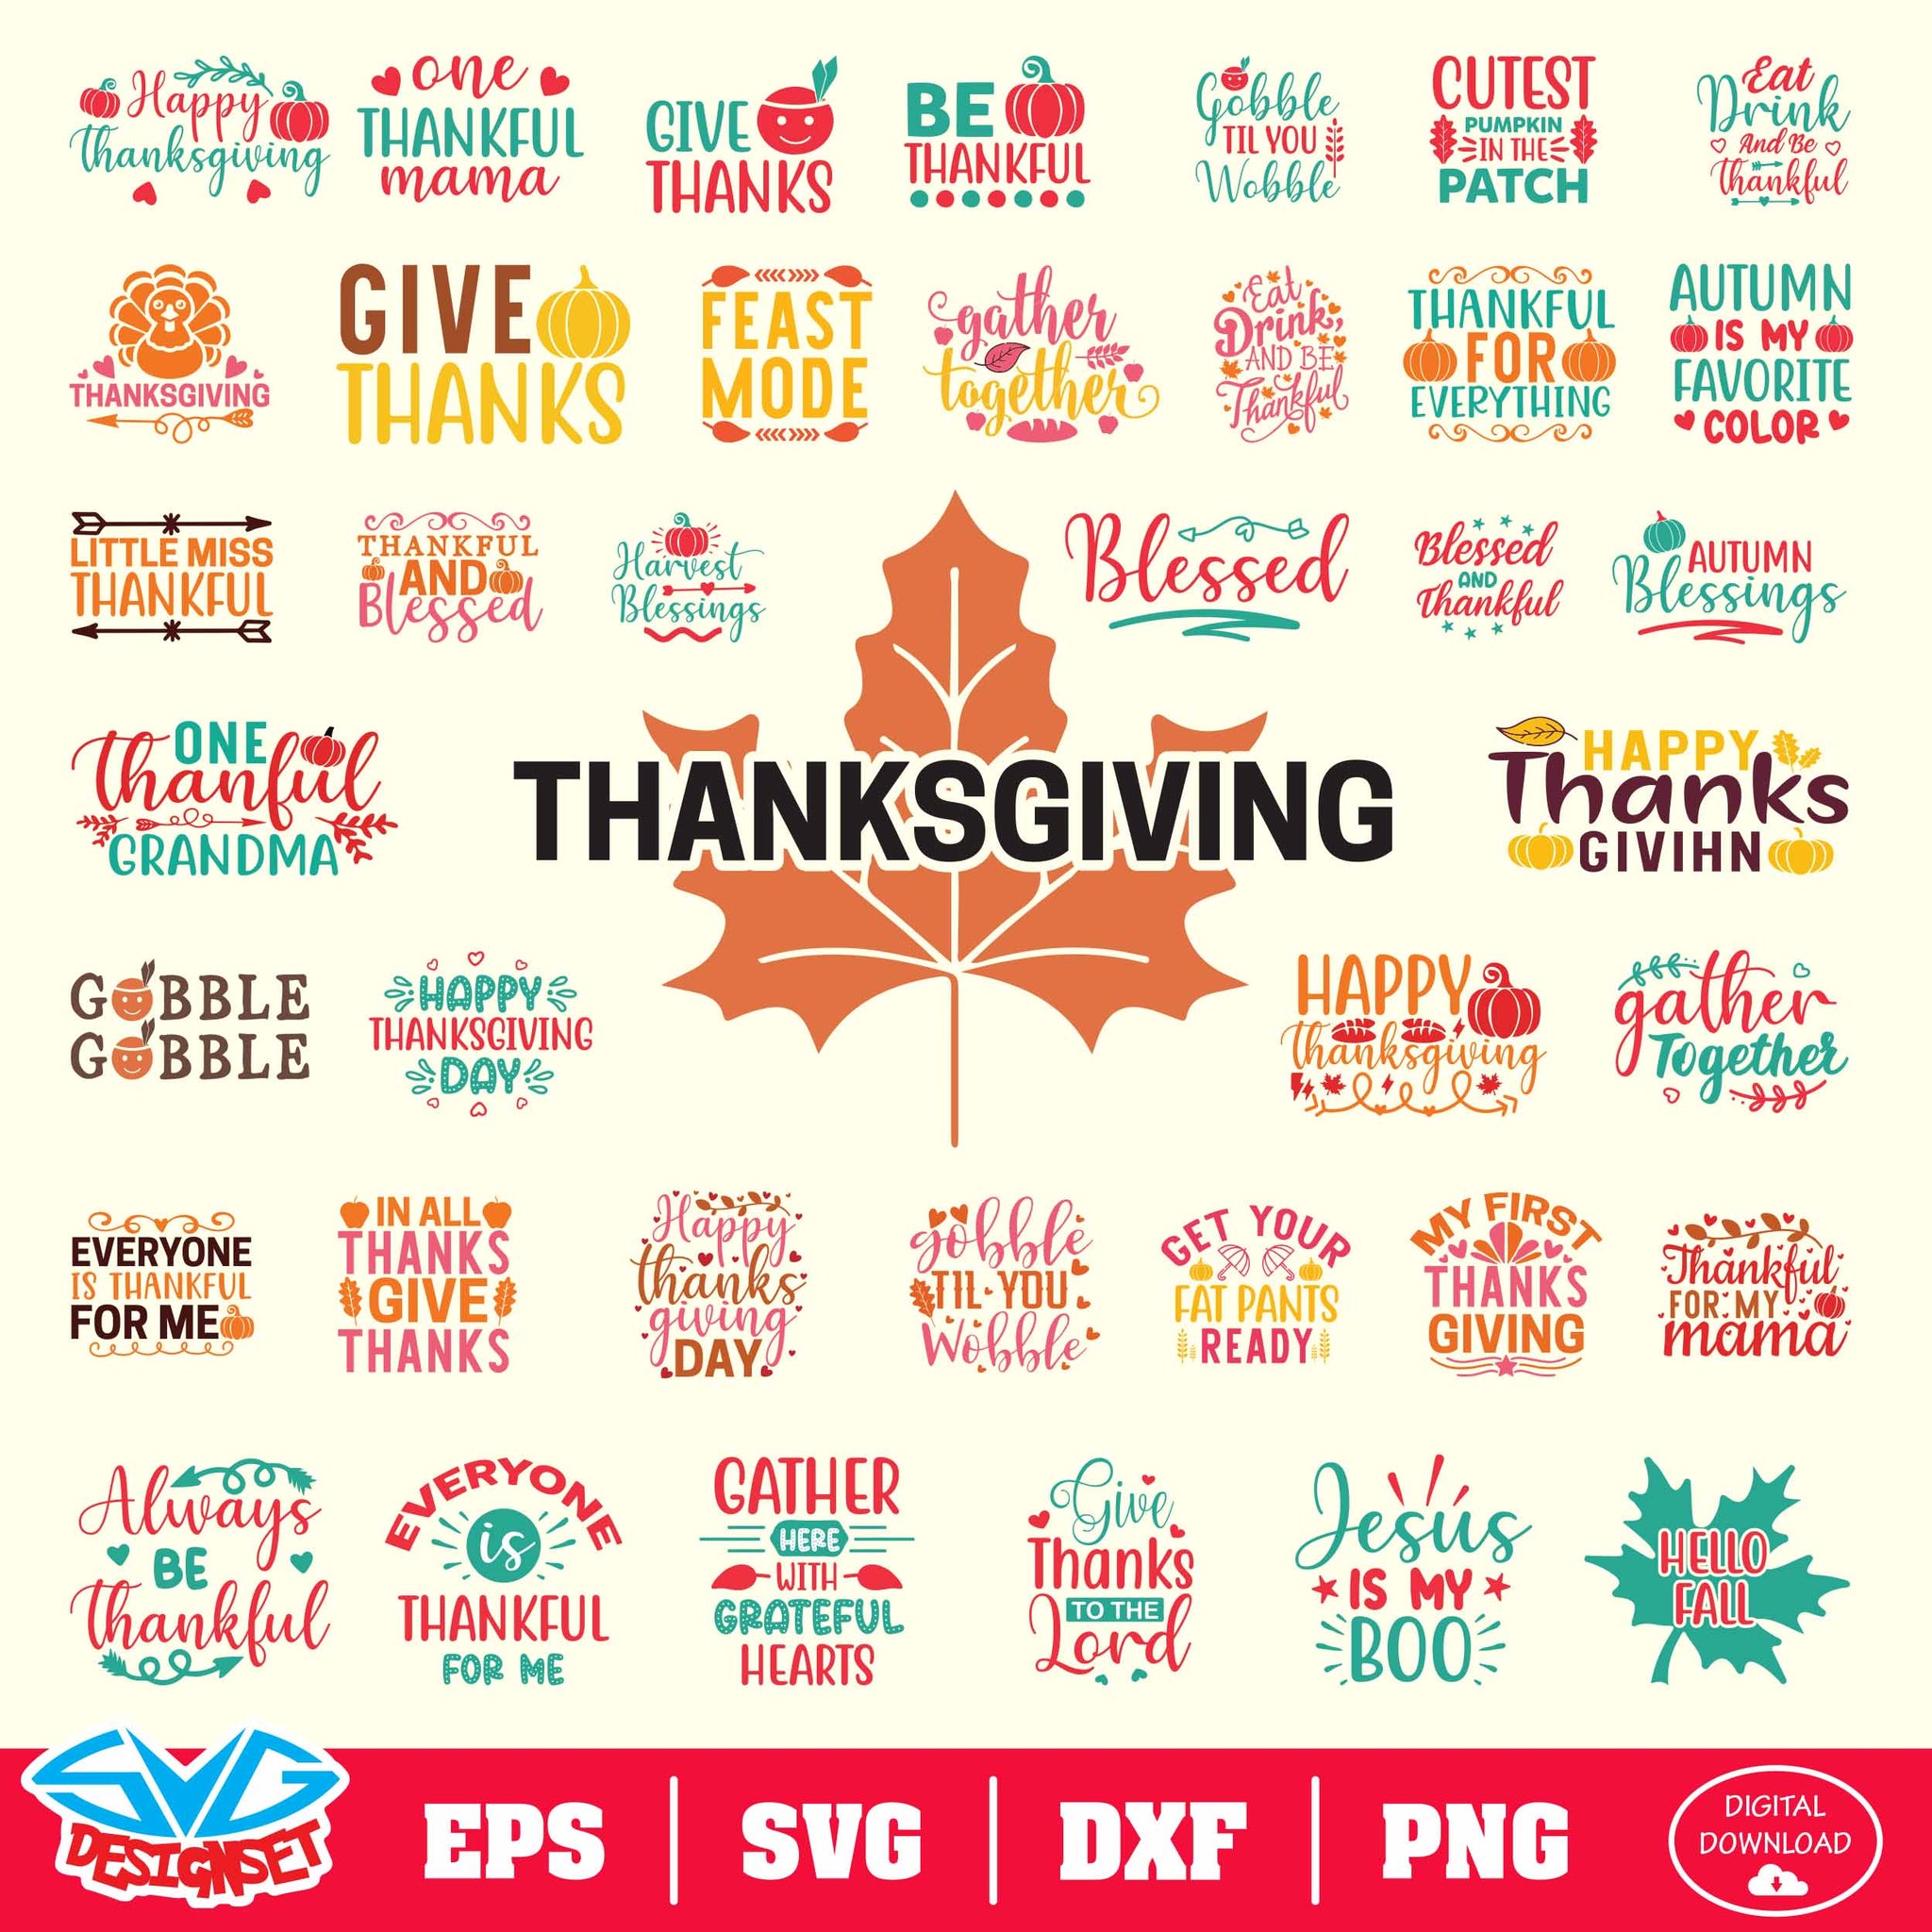 Thanksgiving Svg, Dxf, Eps, Png, Clipart, Silhouette and Cutfiles #002 - SVGDesignSets